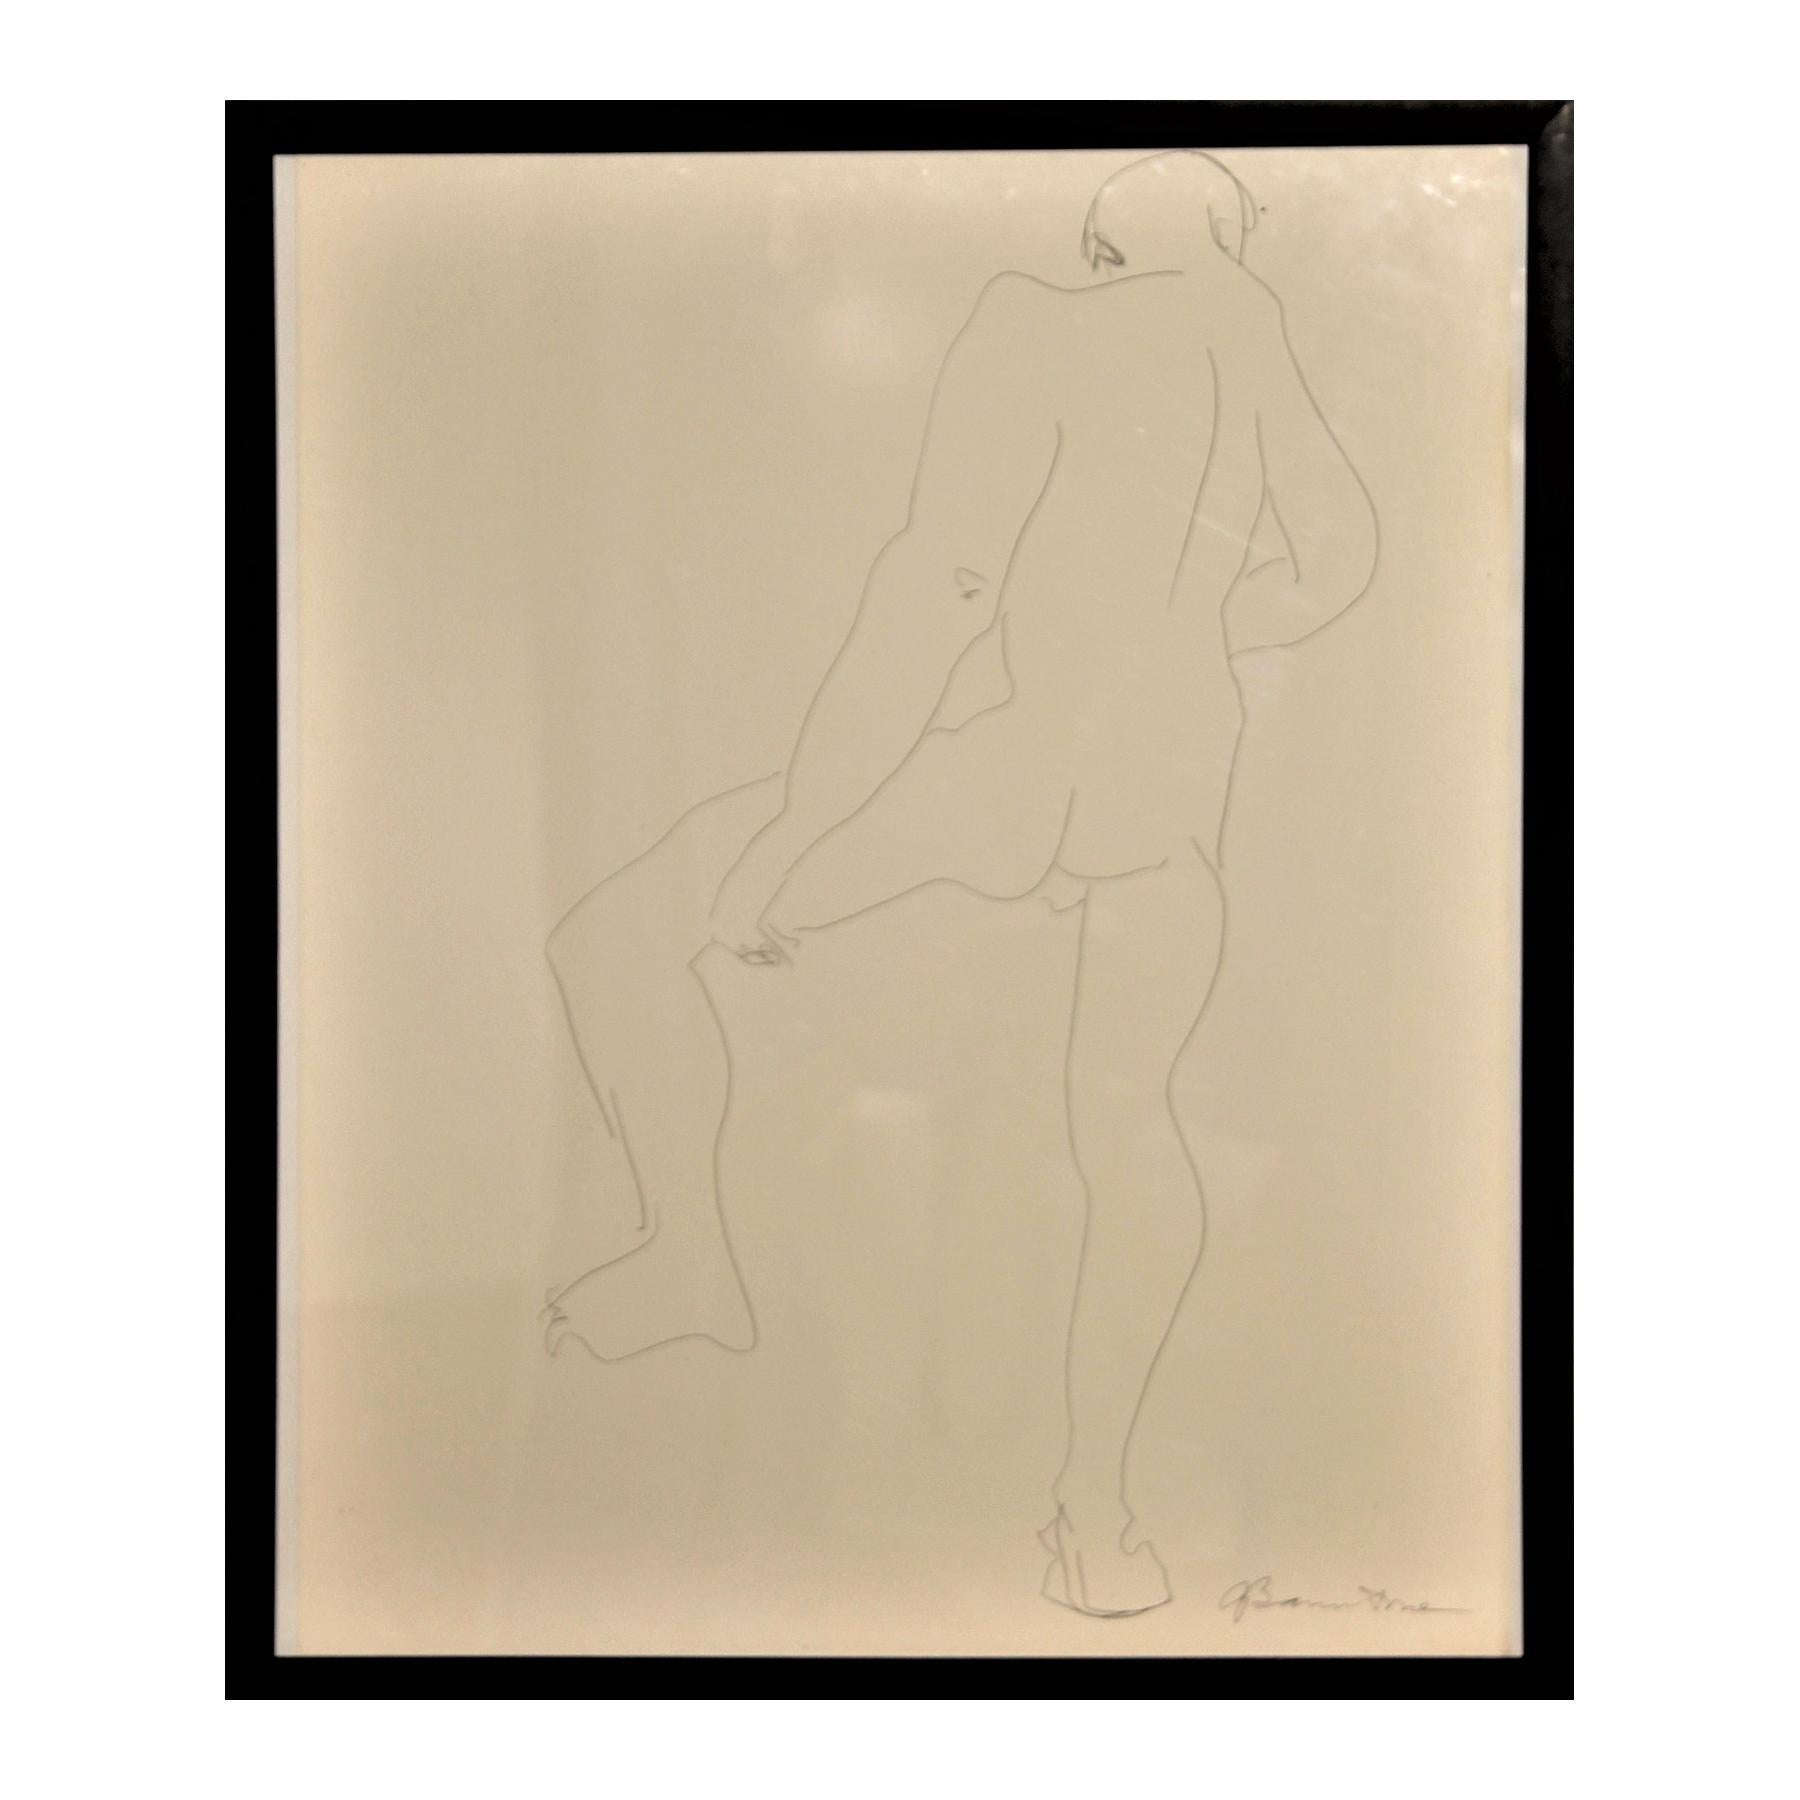 Gertrude Barnstone Figurative Art - Abstract Pen Contour Line Drawing of Male Nude Back with Raised Leg 